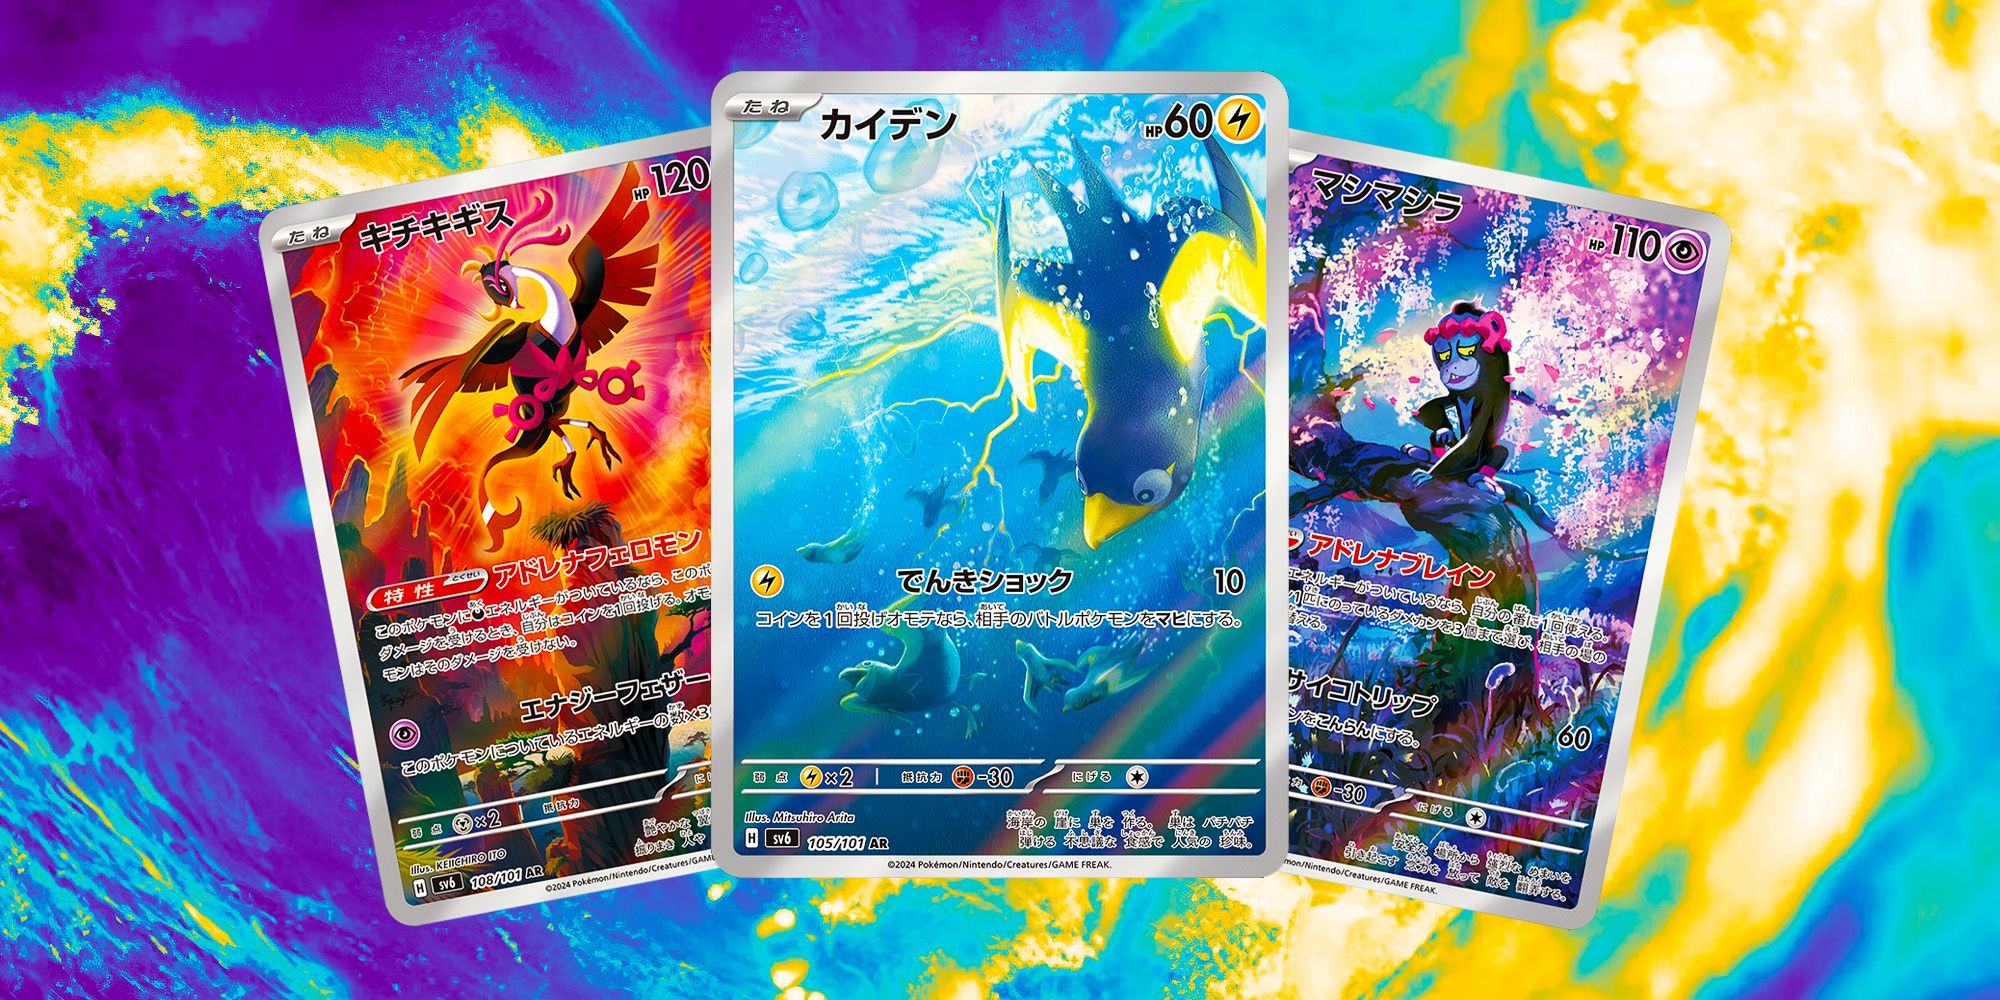 A few of the Secret Rare cards from Mask Of Change, showing off Gen 9 Pokémon.